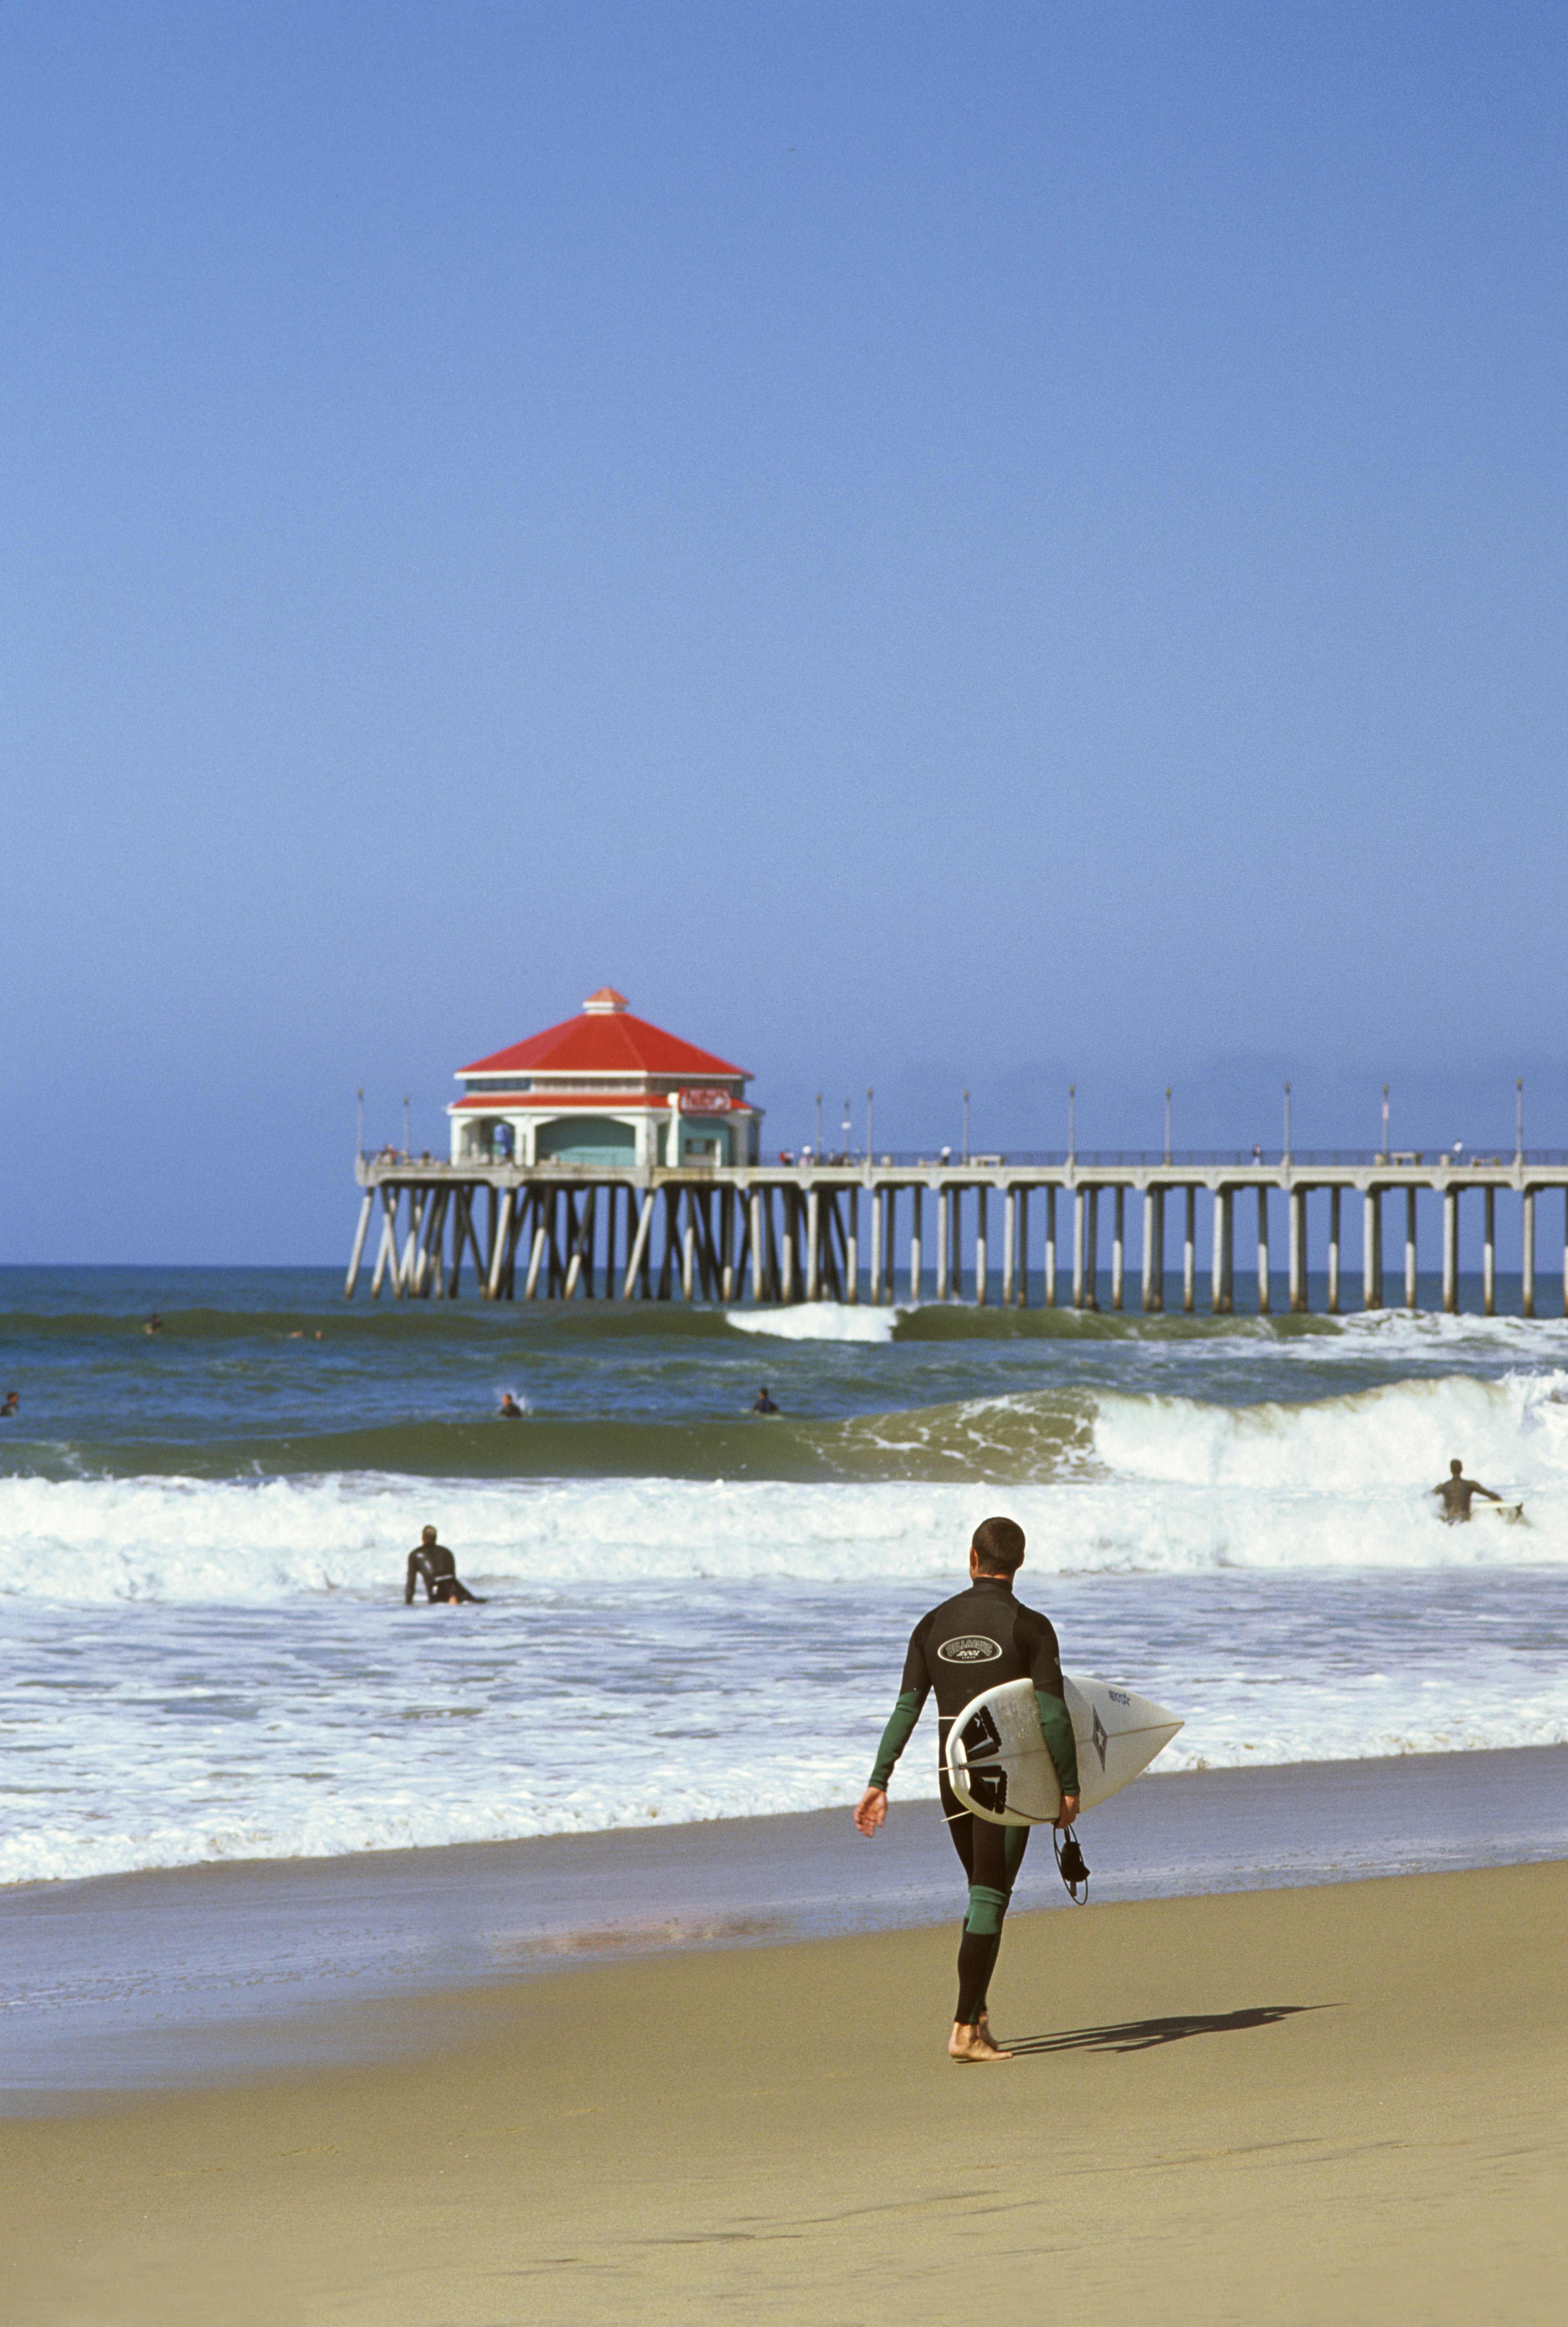 Surfers in black wetsuits hit large white waves against a blue and green ocean with a long pale wooden pier in the background topped with a red-roofed pavilion